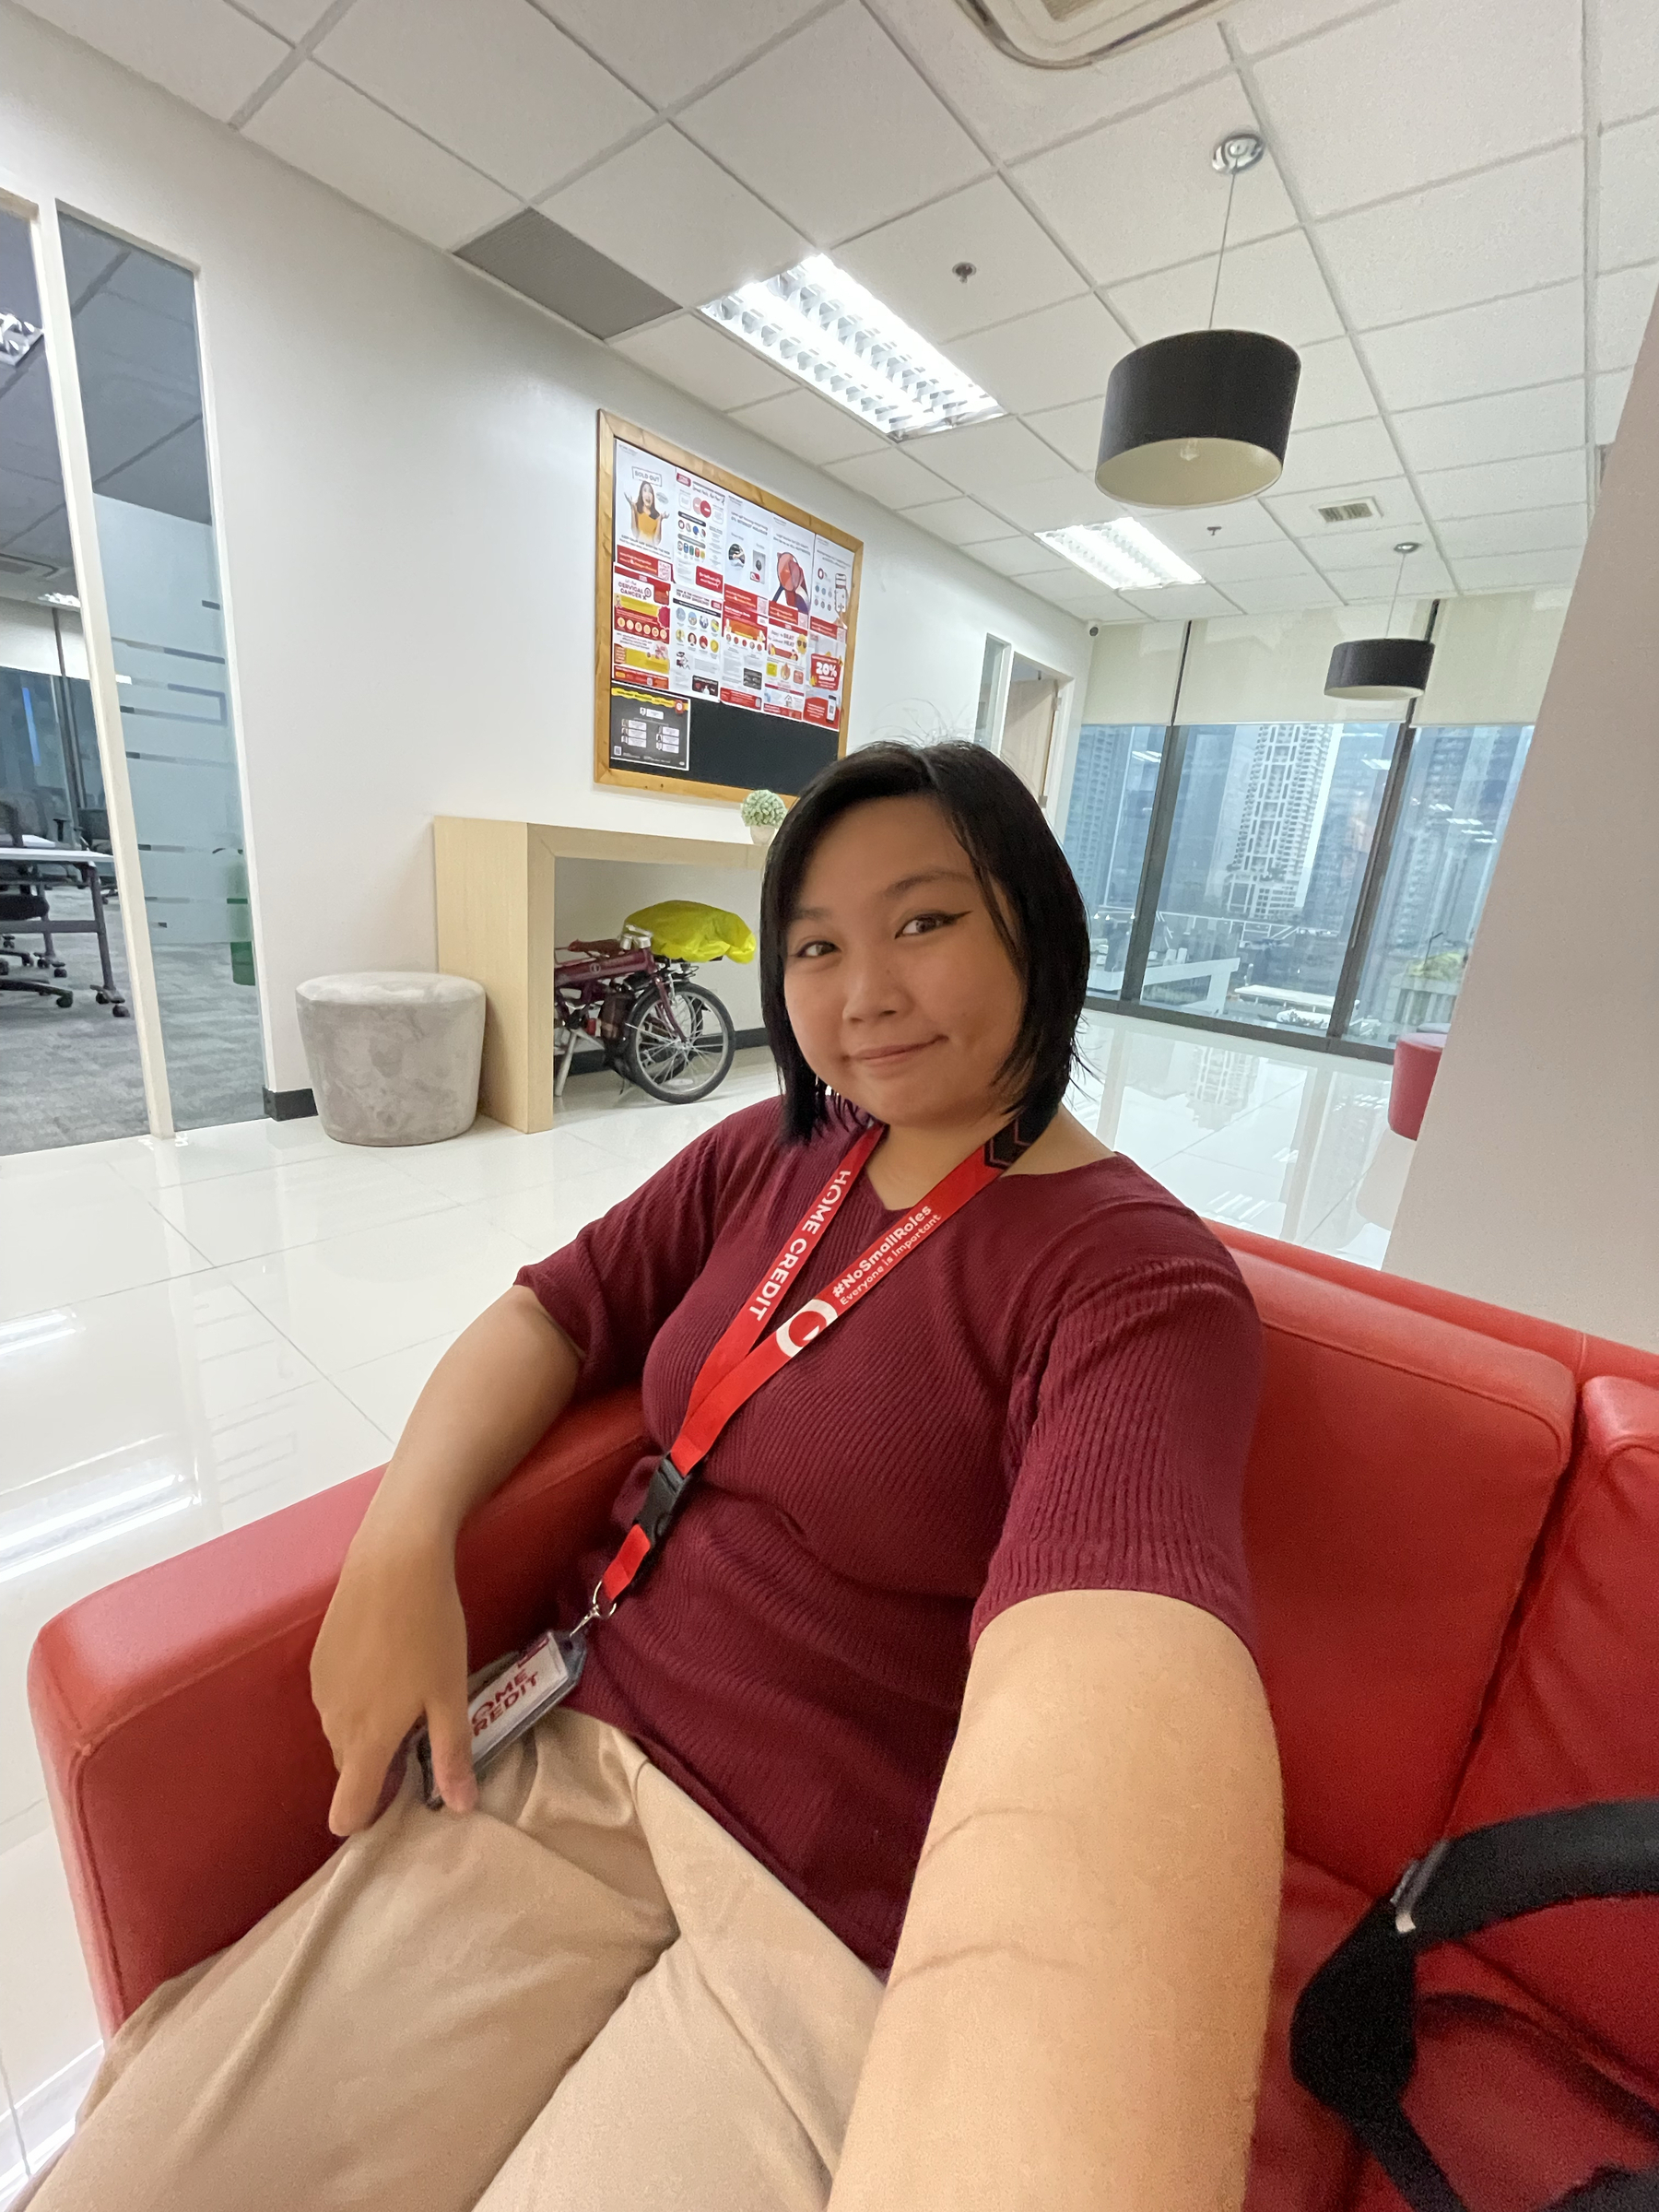 wide angle selfie of Chi in office attire sitting in their office lobby lounge, with her folding bike neatly tucked under a table and seen behind her.